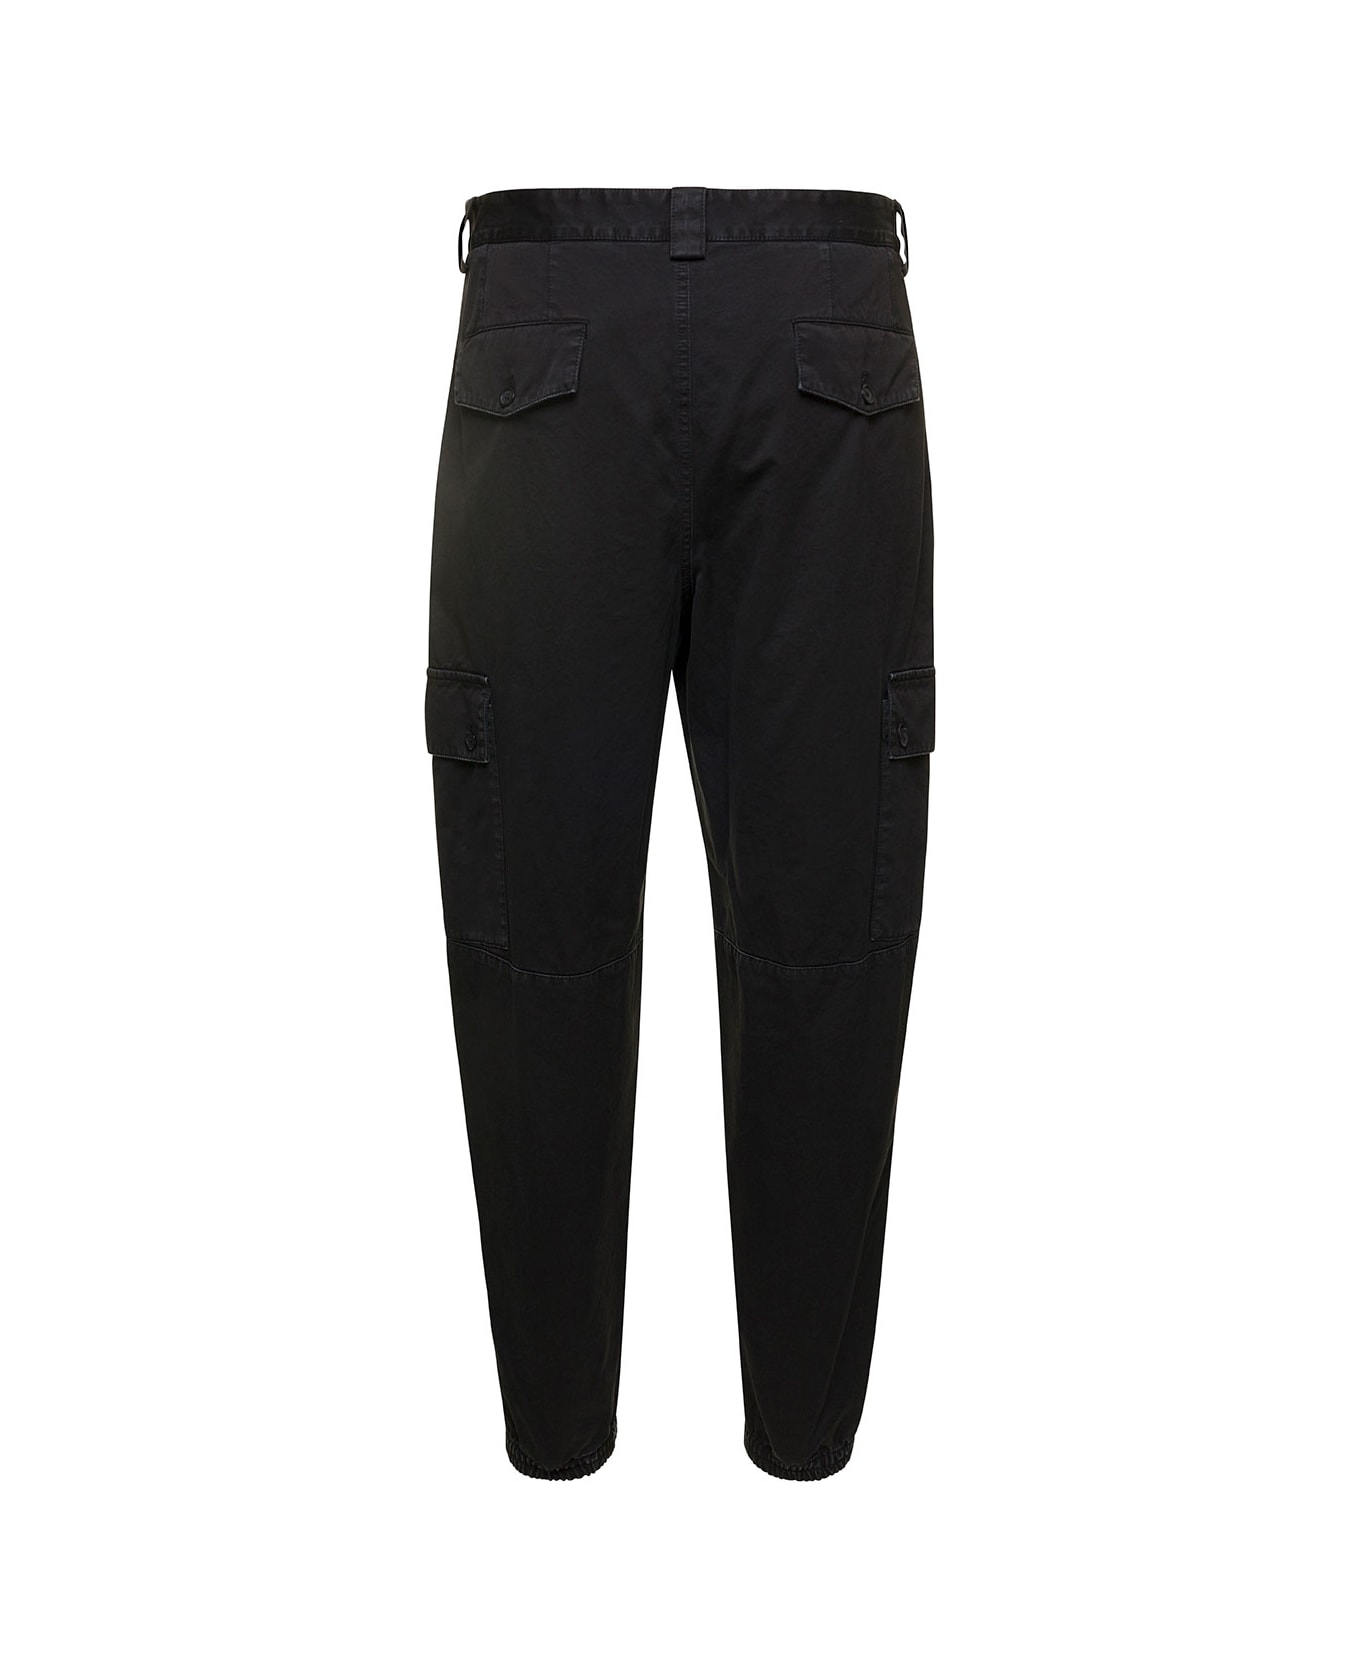 Dolce & Gabbana Black Cargo Pants With Multi-pockets In Cotton Man - Black